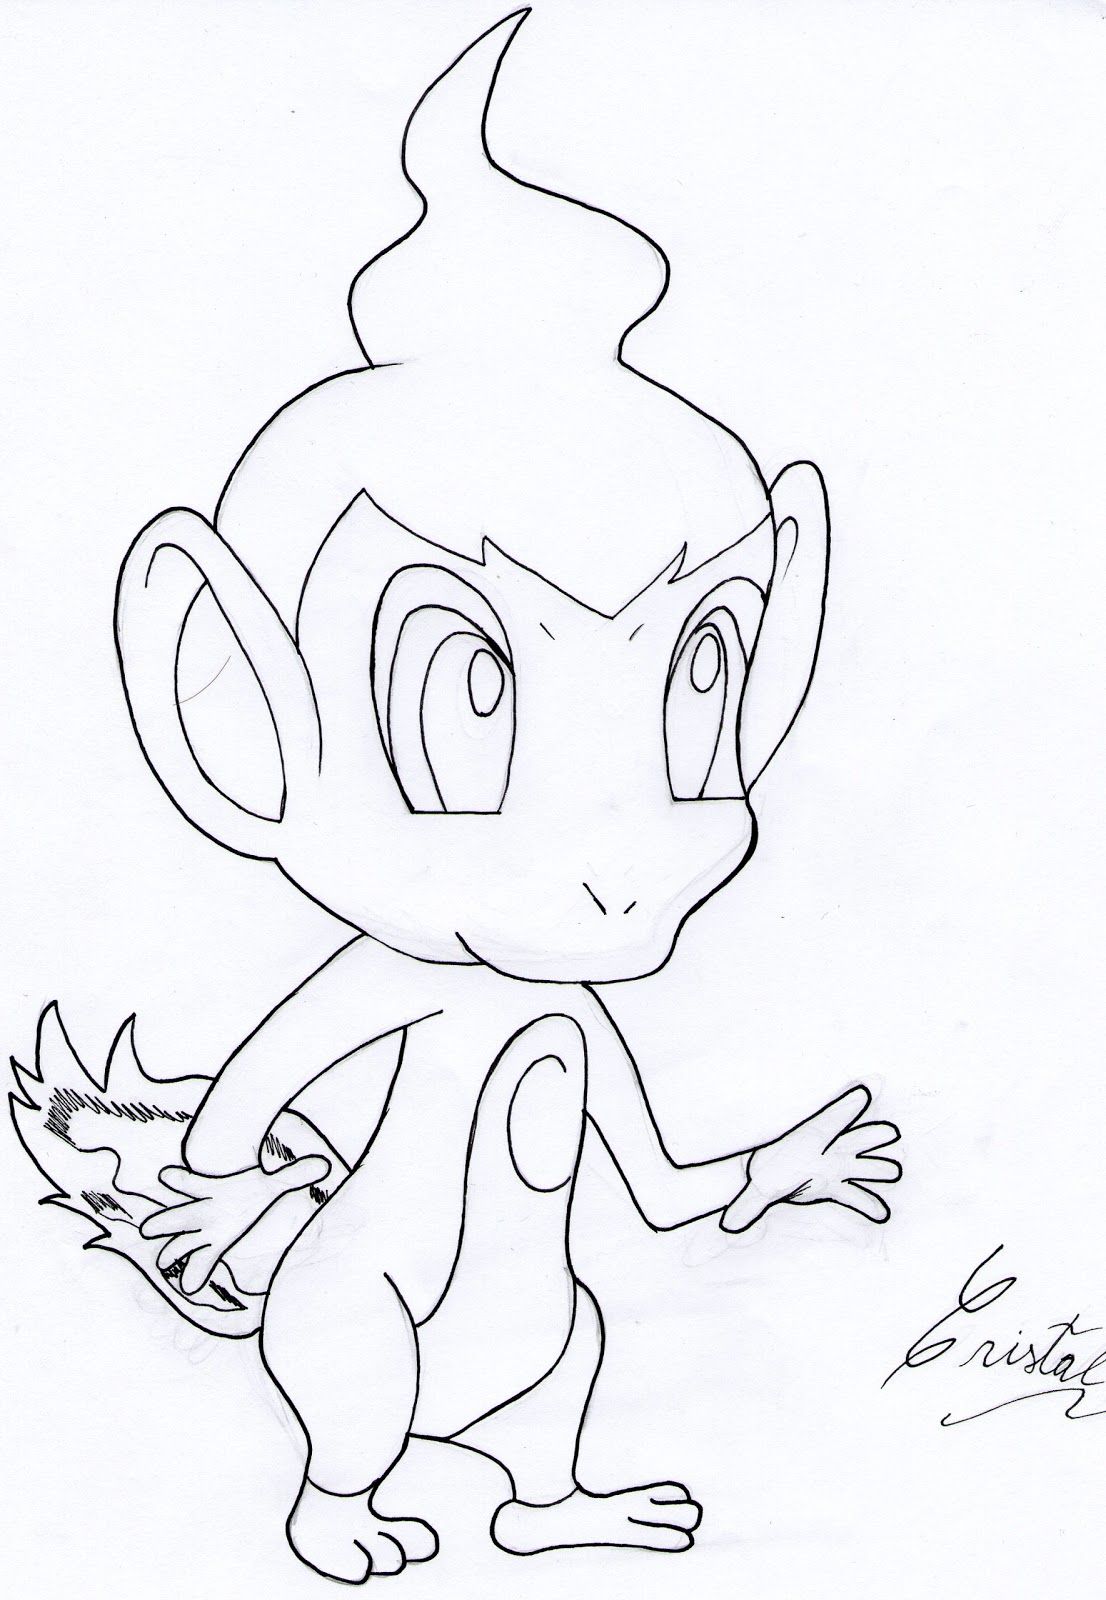 Chimchar Coloring Pages Related Keywords & Suggestions - Chimchar ...